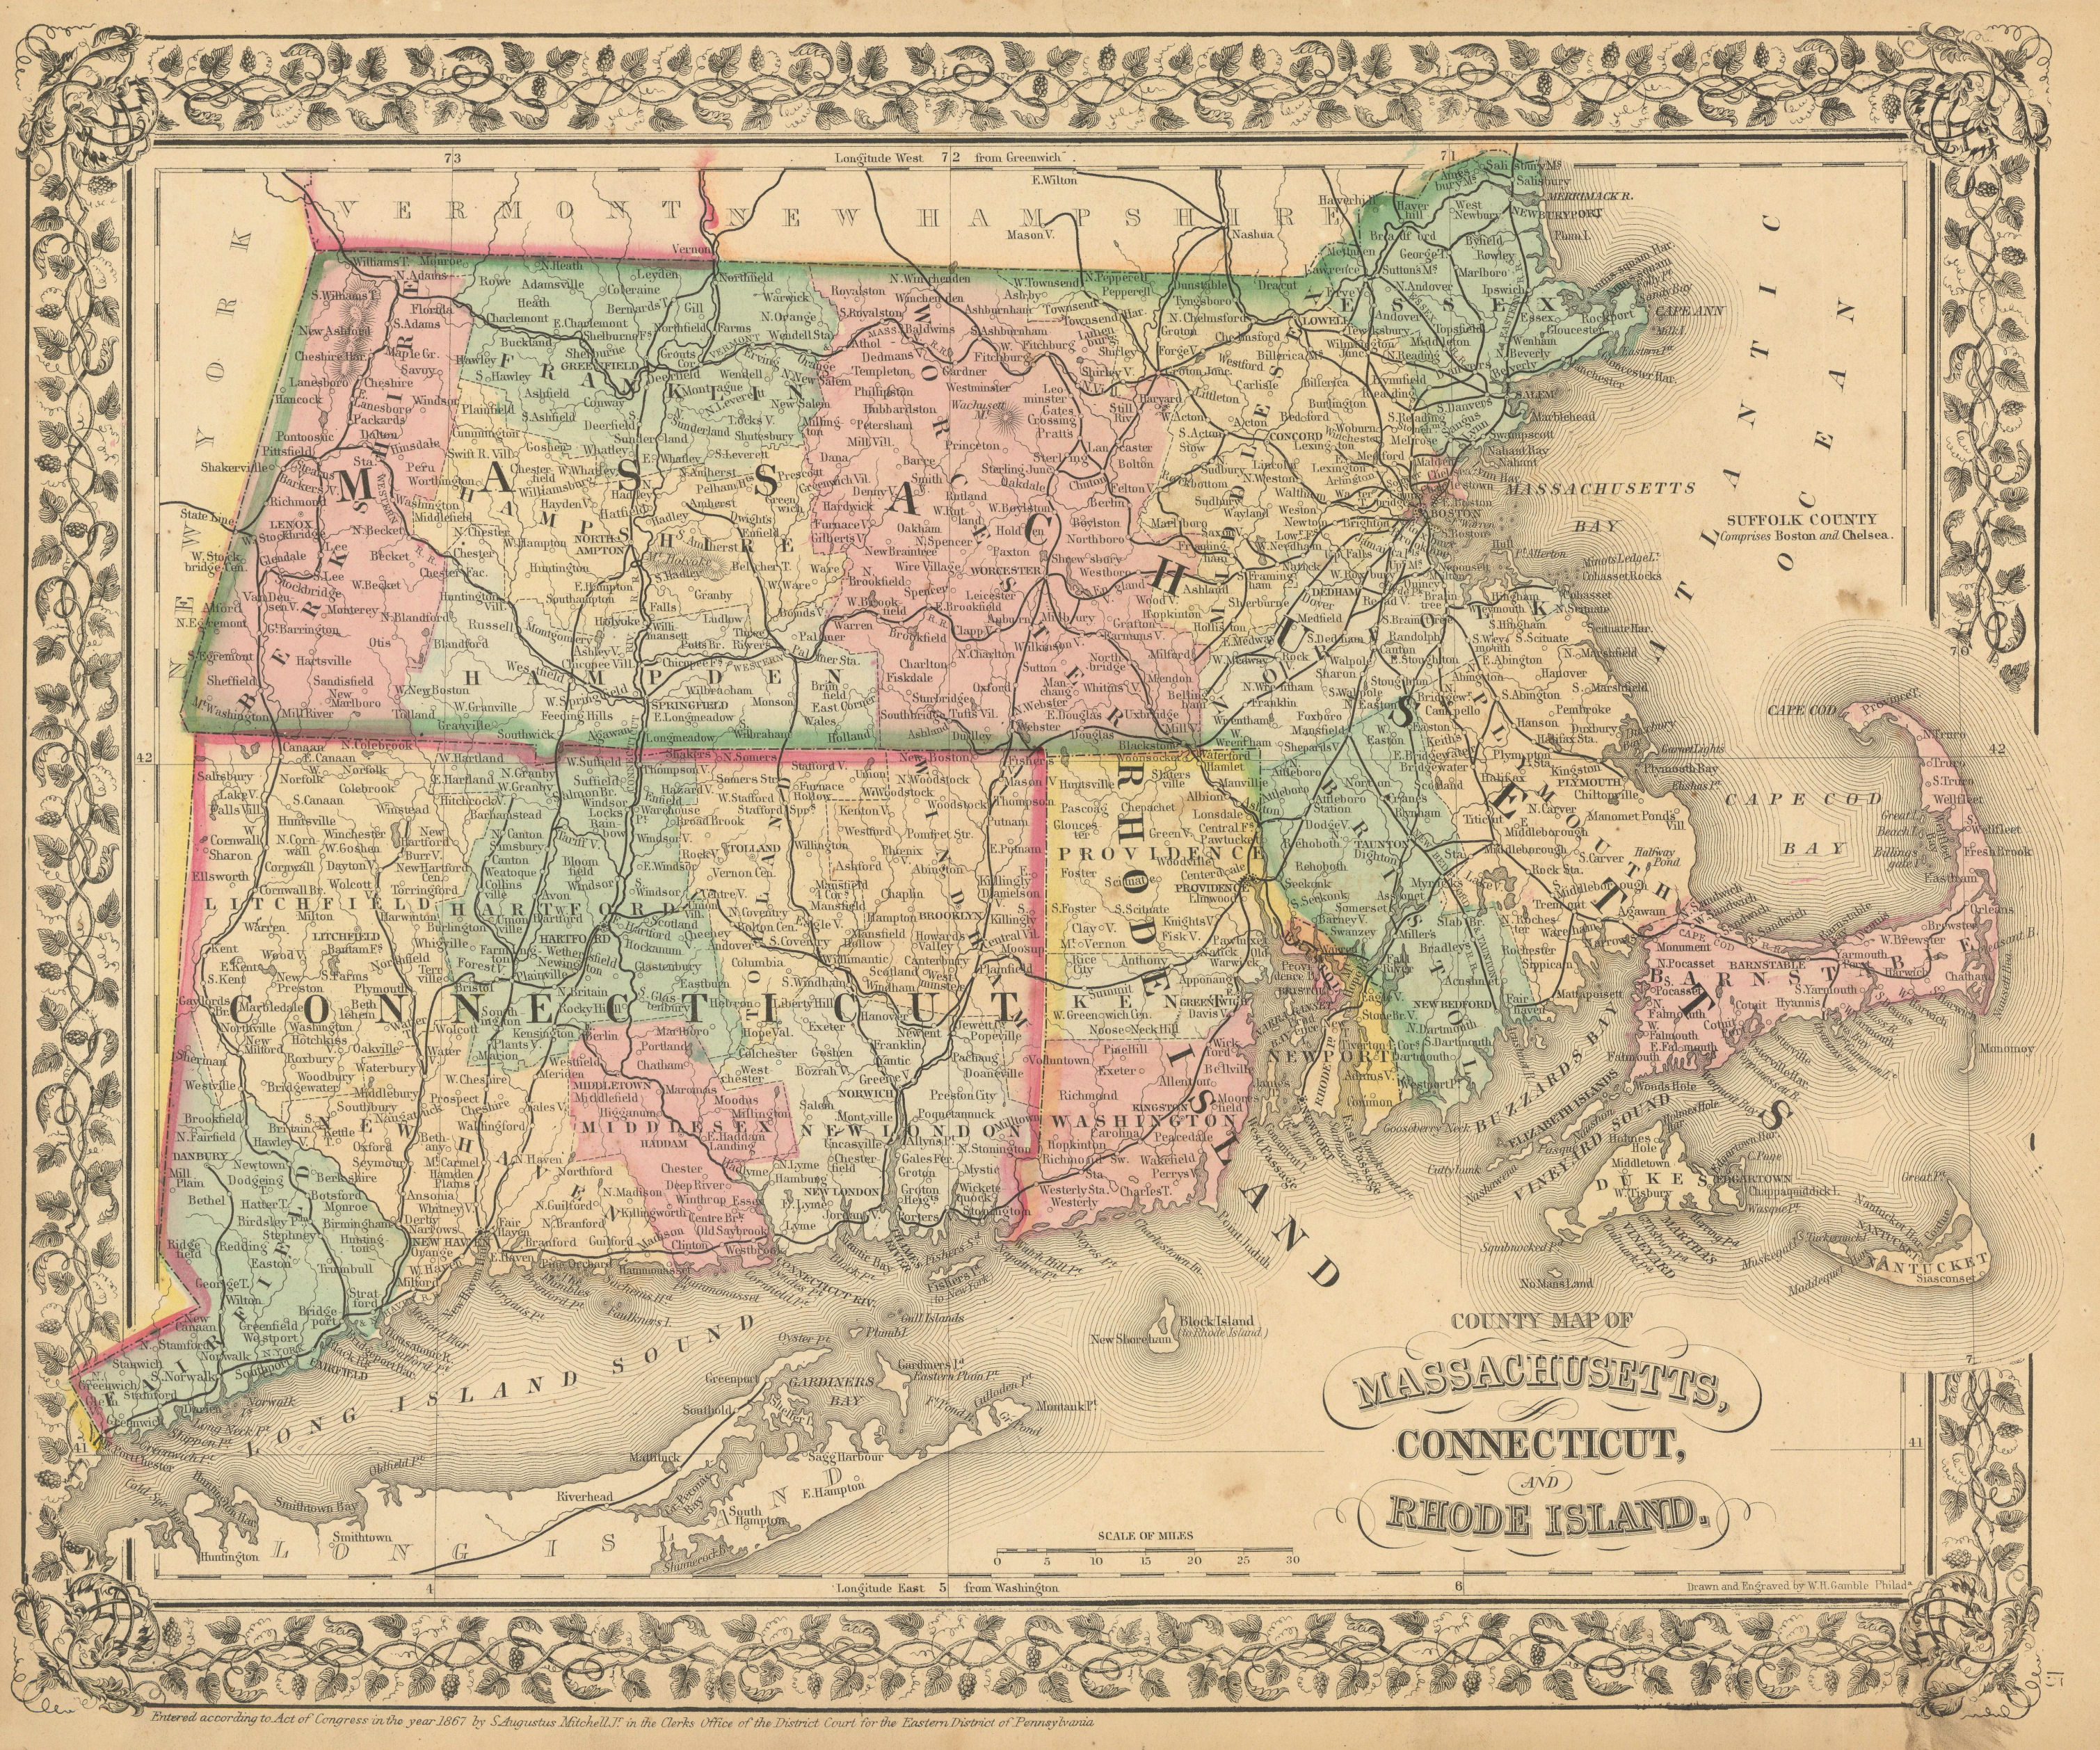 Associate Product County map of Massachusetts, Connecticut, and Rhode Island. MITCHELL 1869